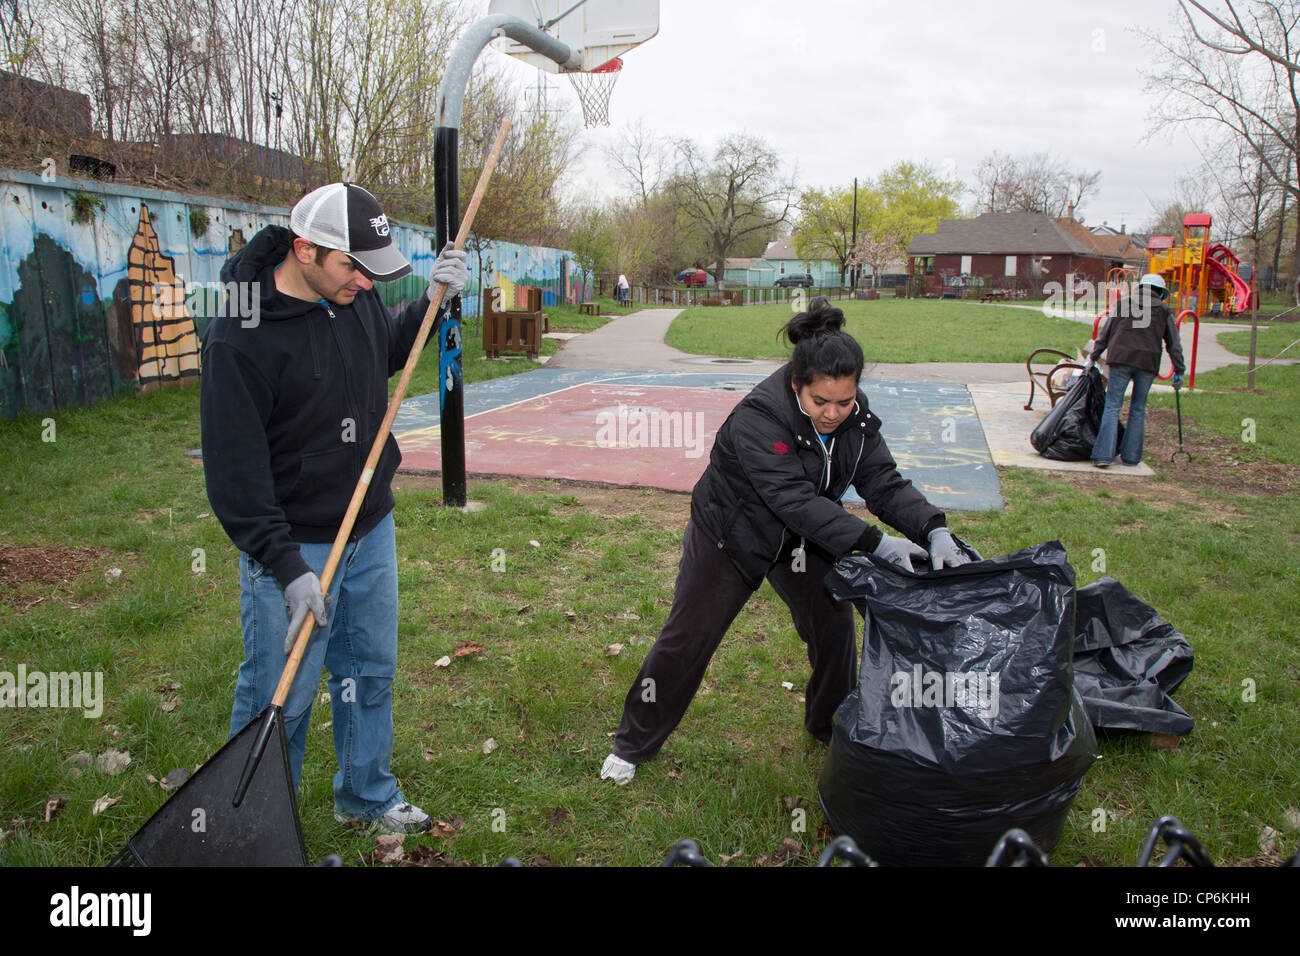 Detroit, Michigan - Volunteers from Chrysler Corp. clean trash and leaves from a park. Stock Photo